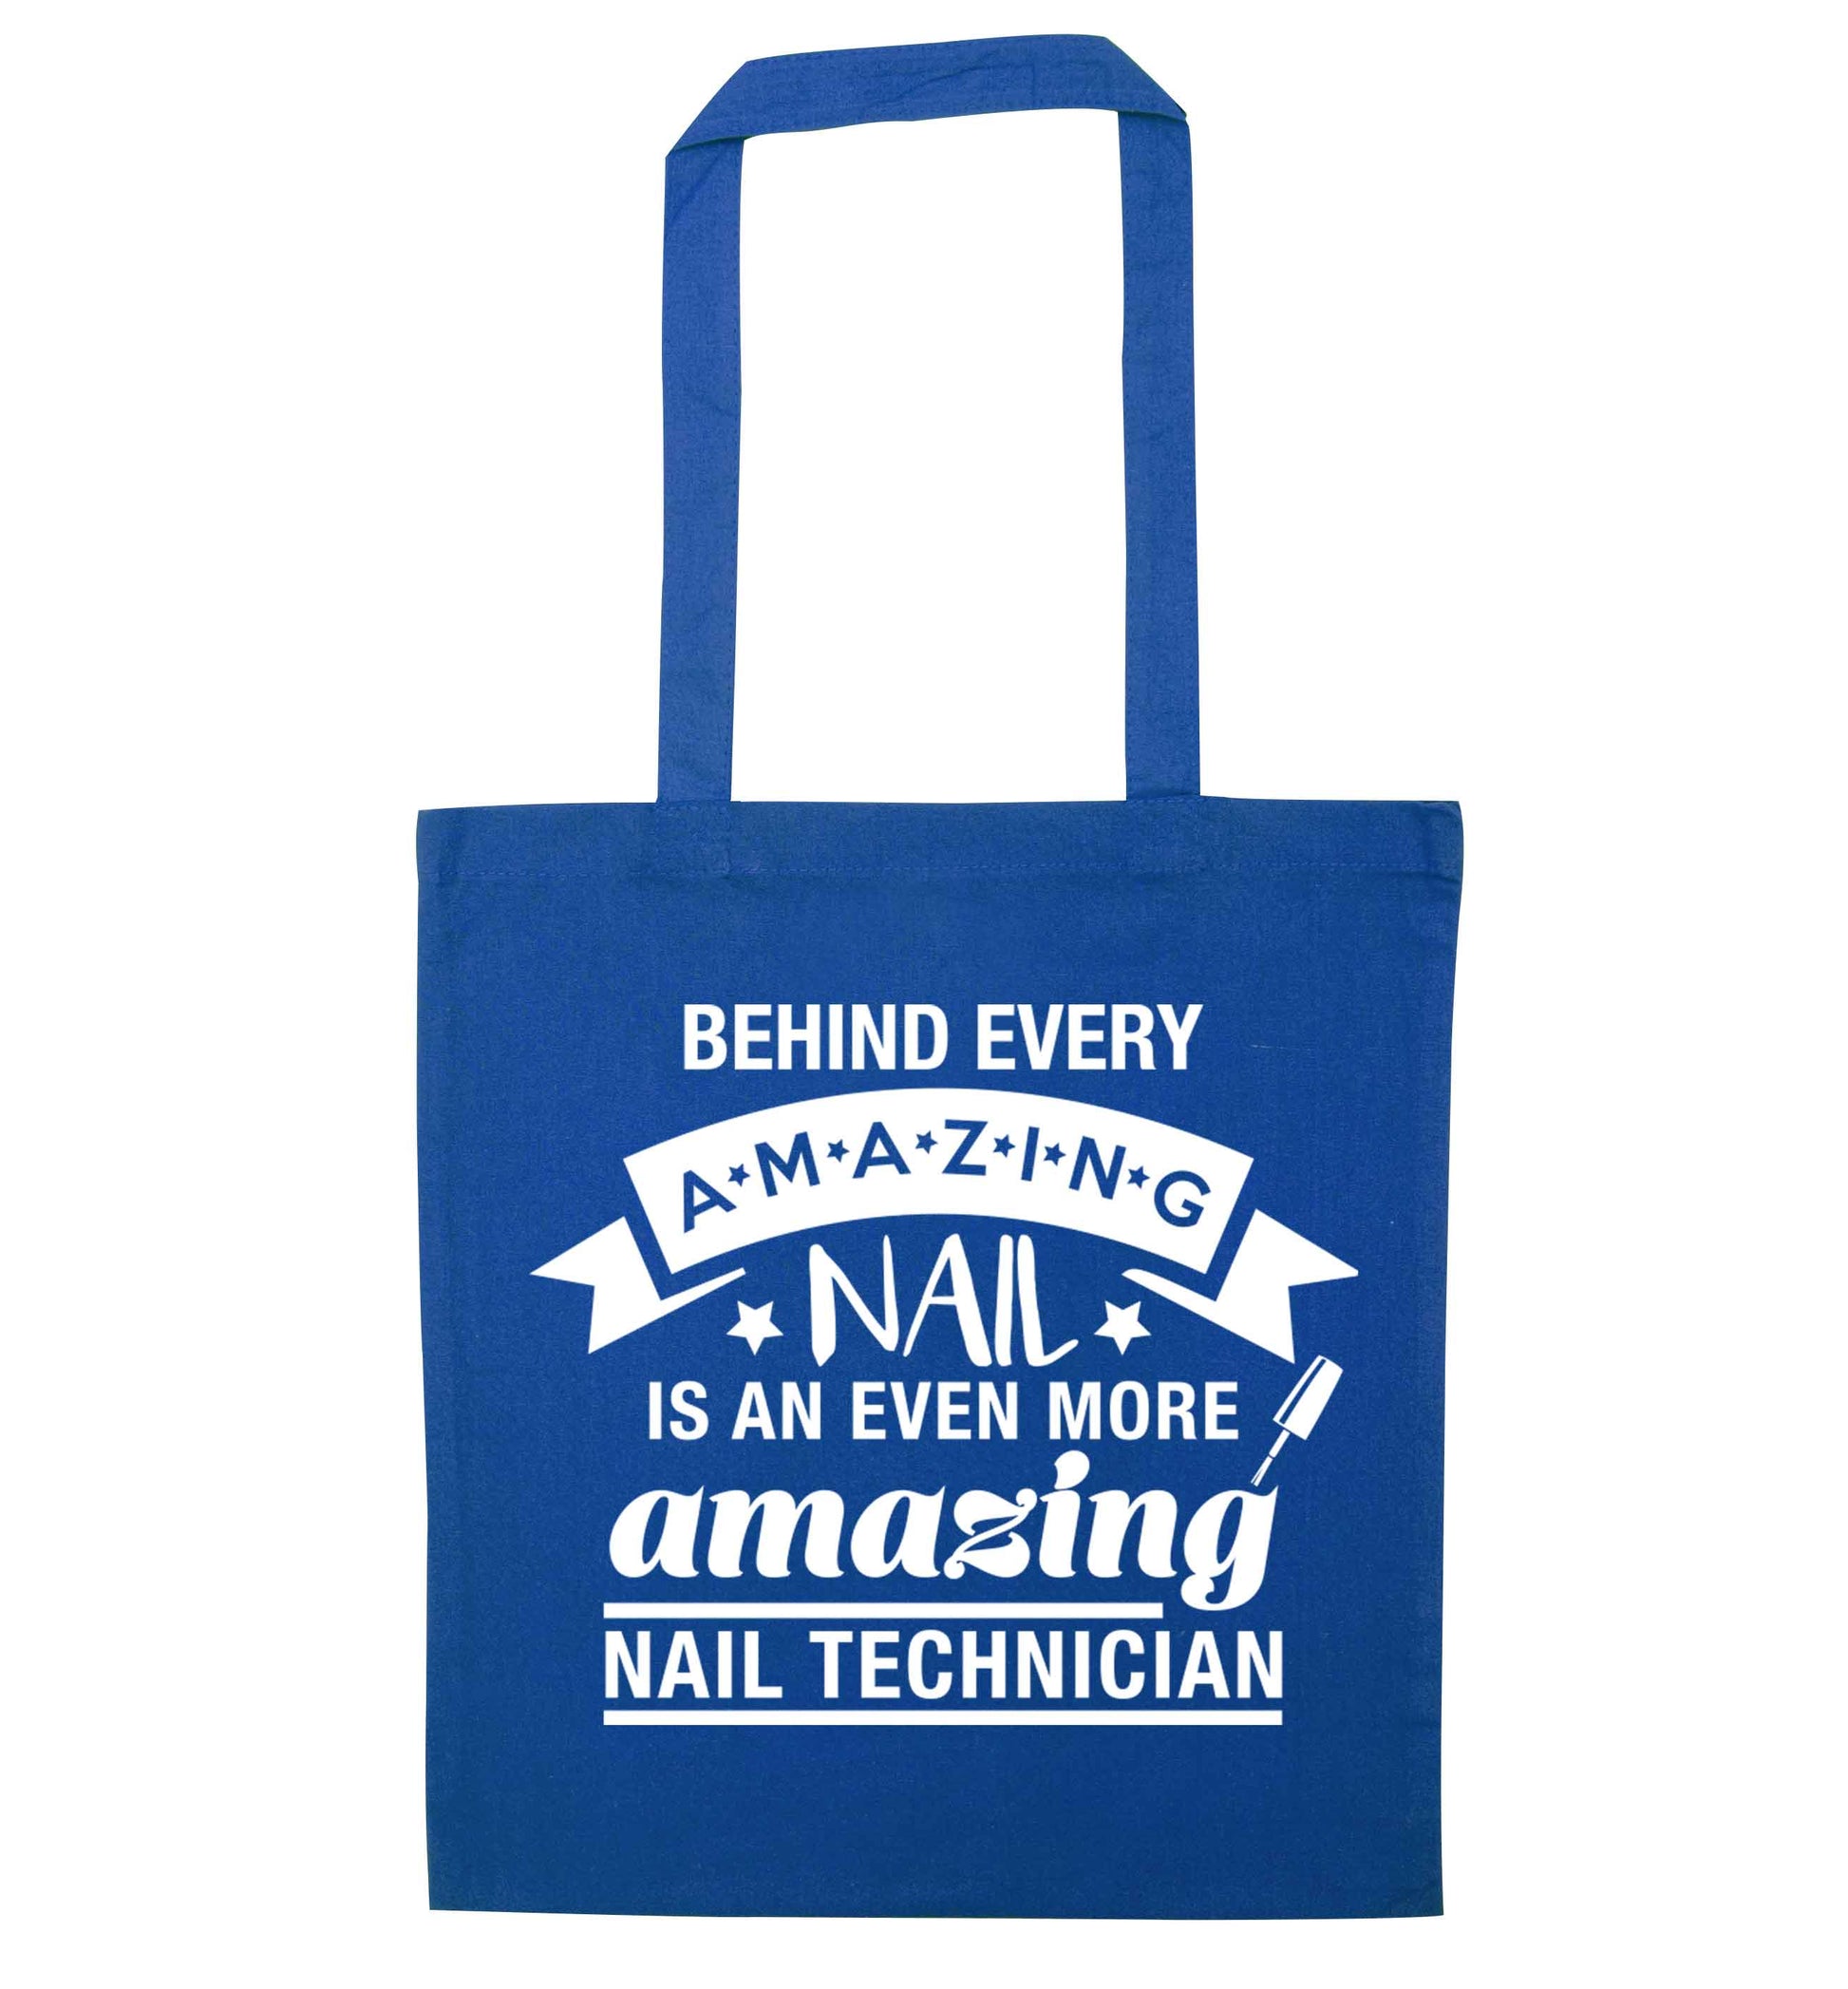 Behind every amazing nail is an even more amazing nail technician blue tote bag